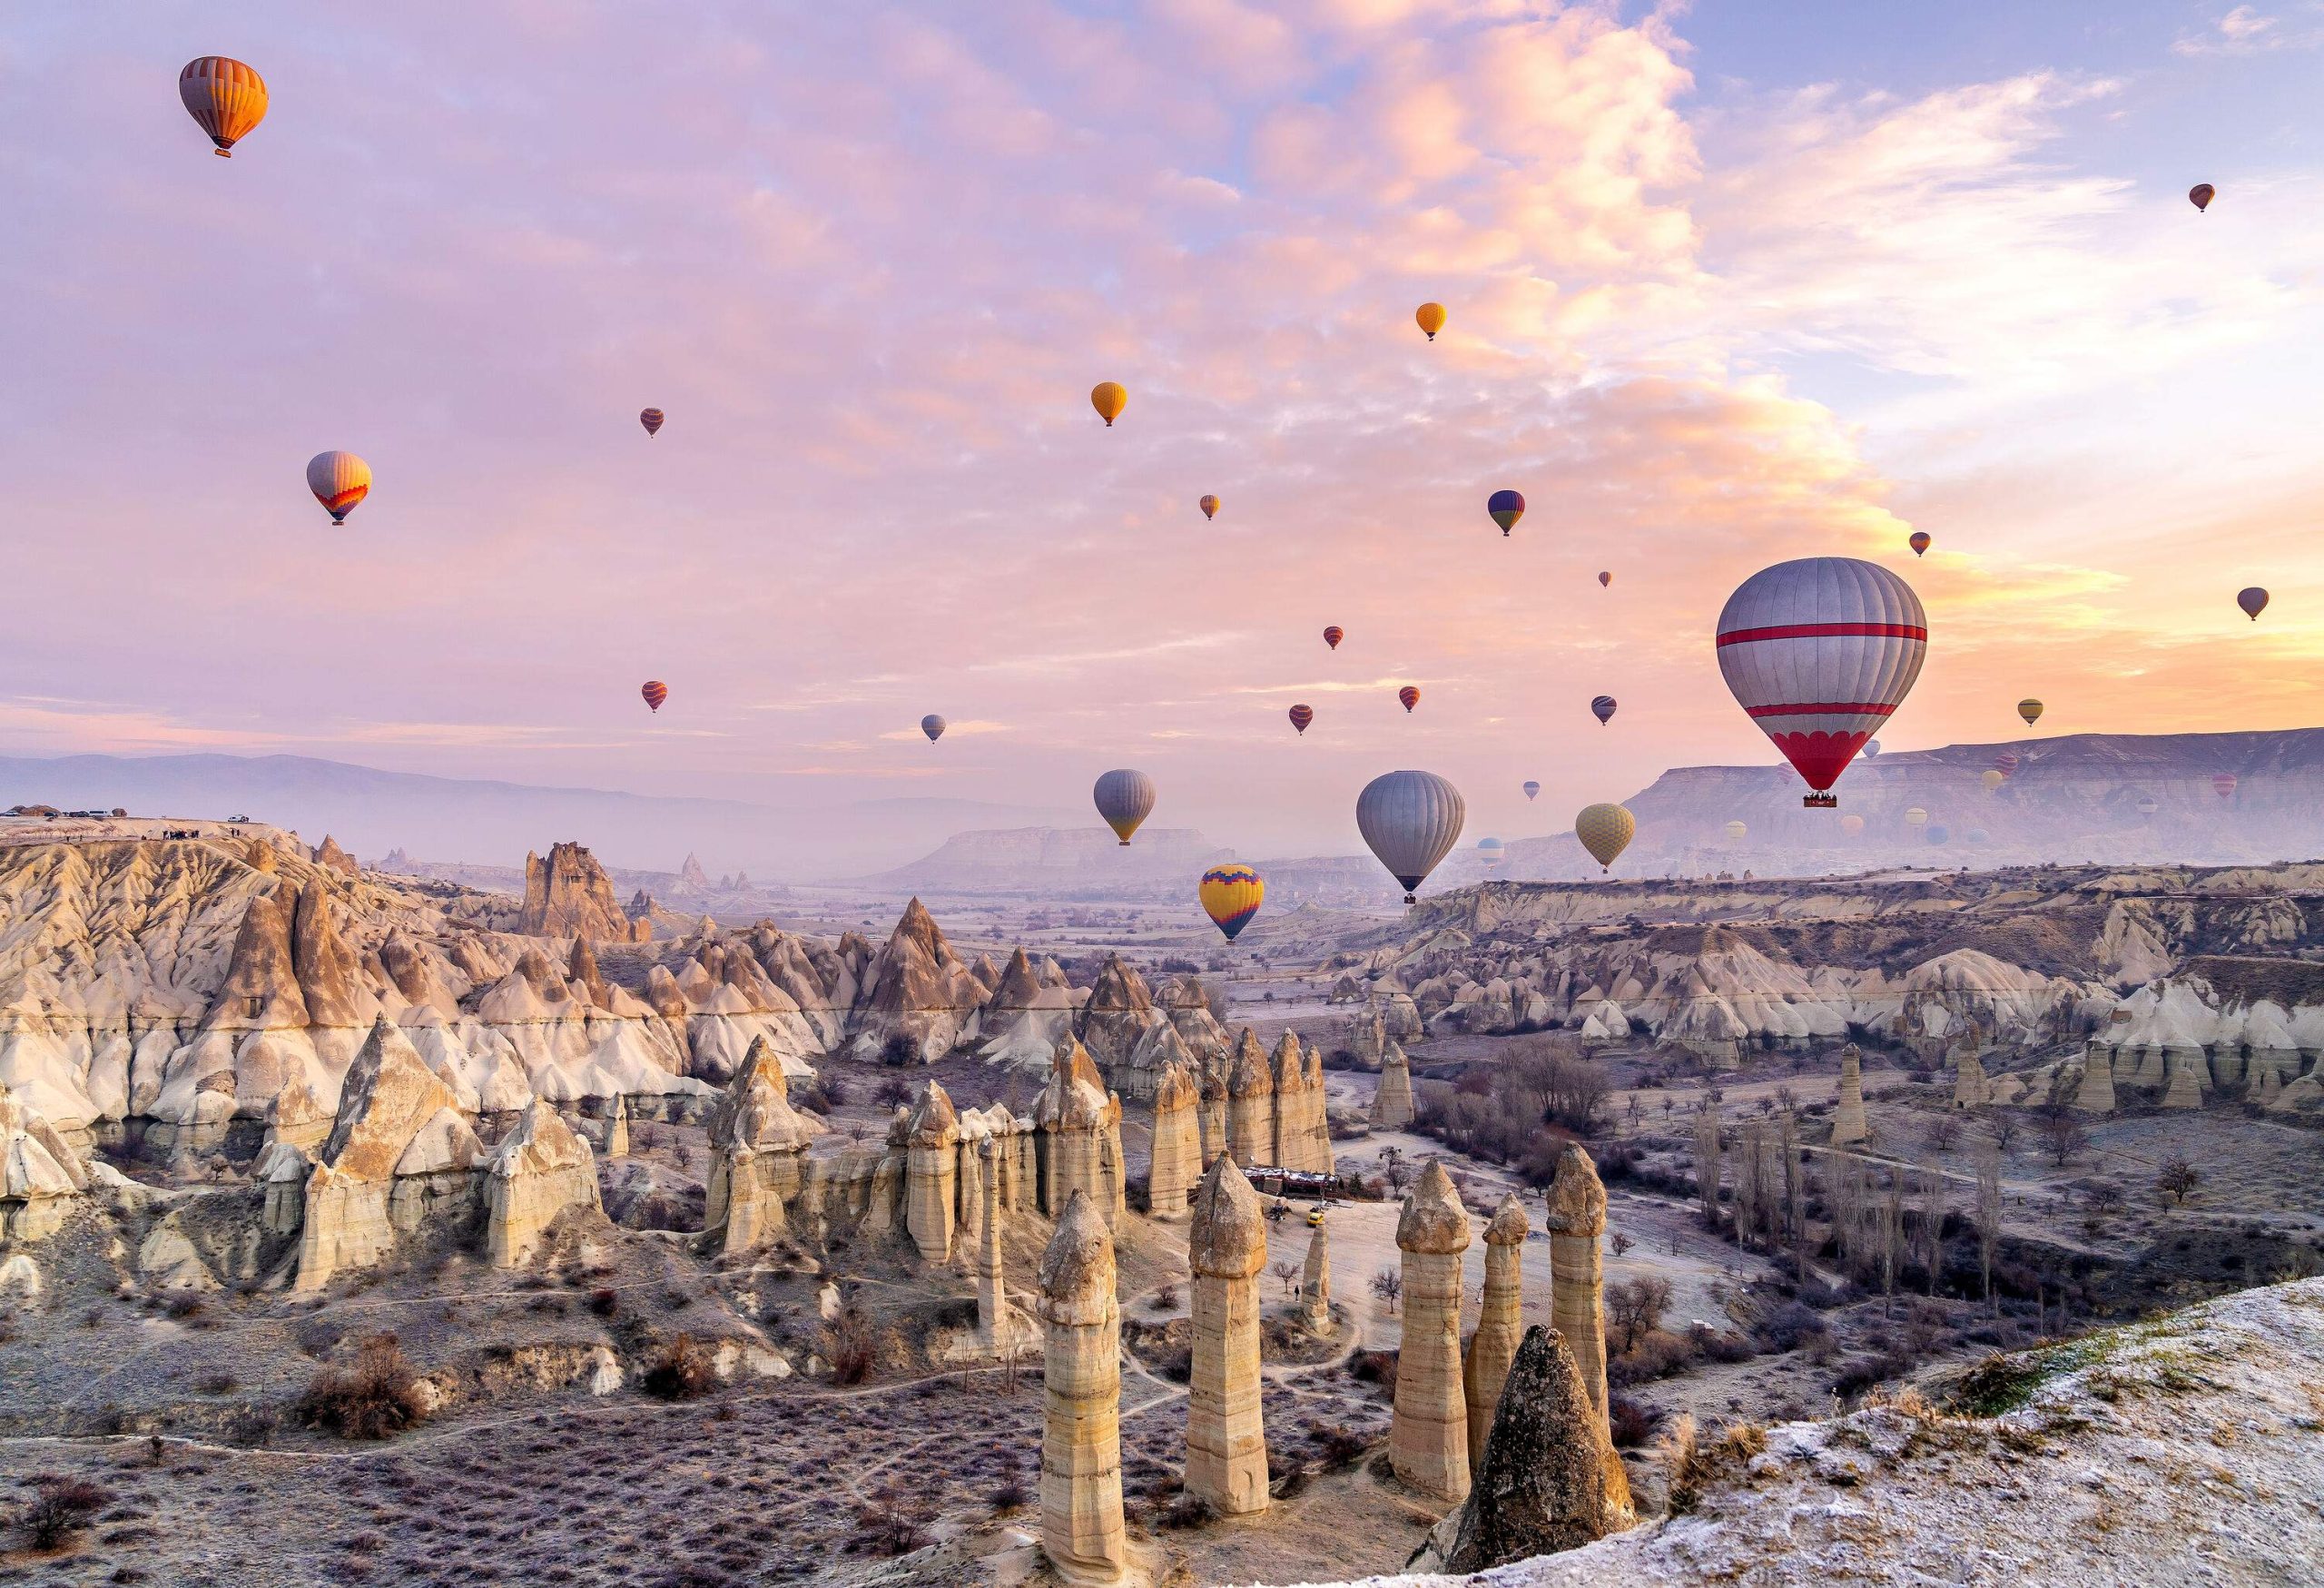 Colourful hot air balloons fly above the amazing rock formations landscaped in the valley.